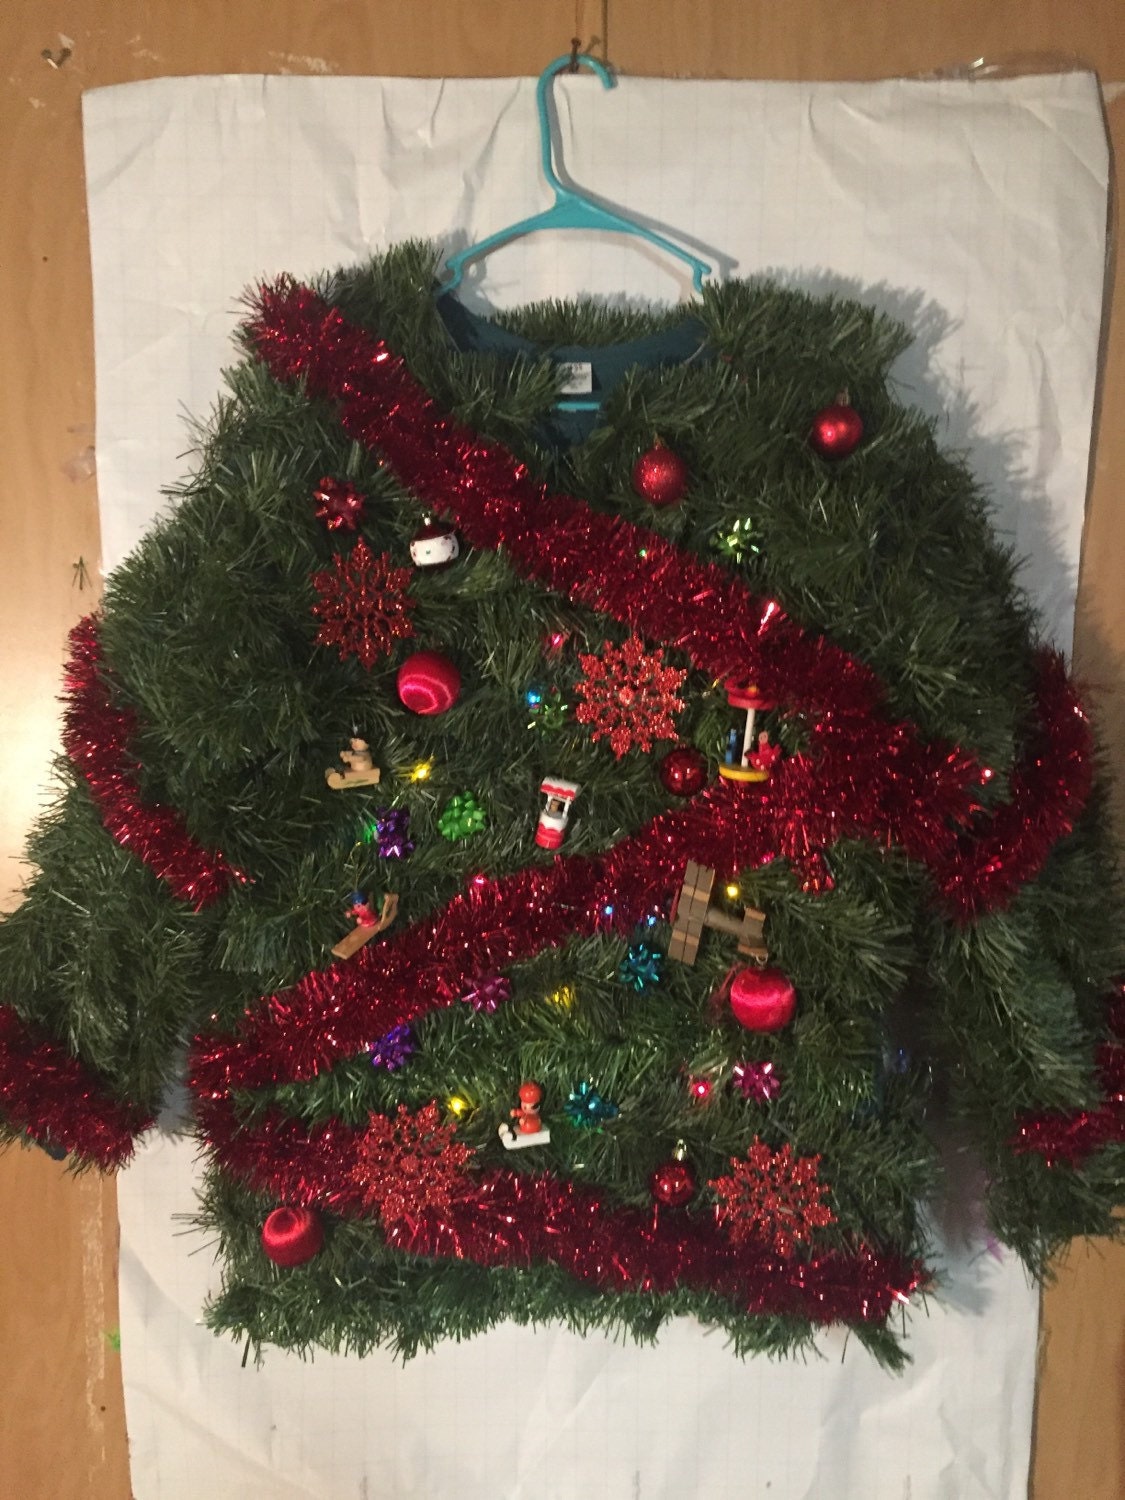 How to Fill in Ugly Bare Spots on Your Christmas Tree « Christmas Ideas ::  WonderHowTo